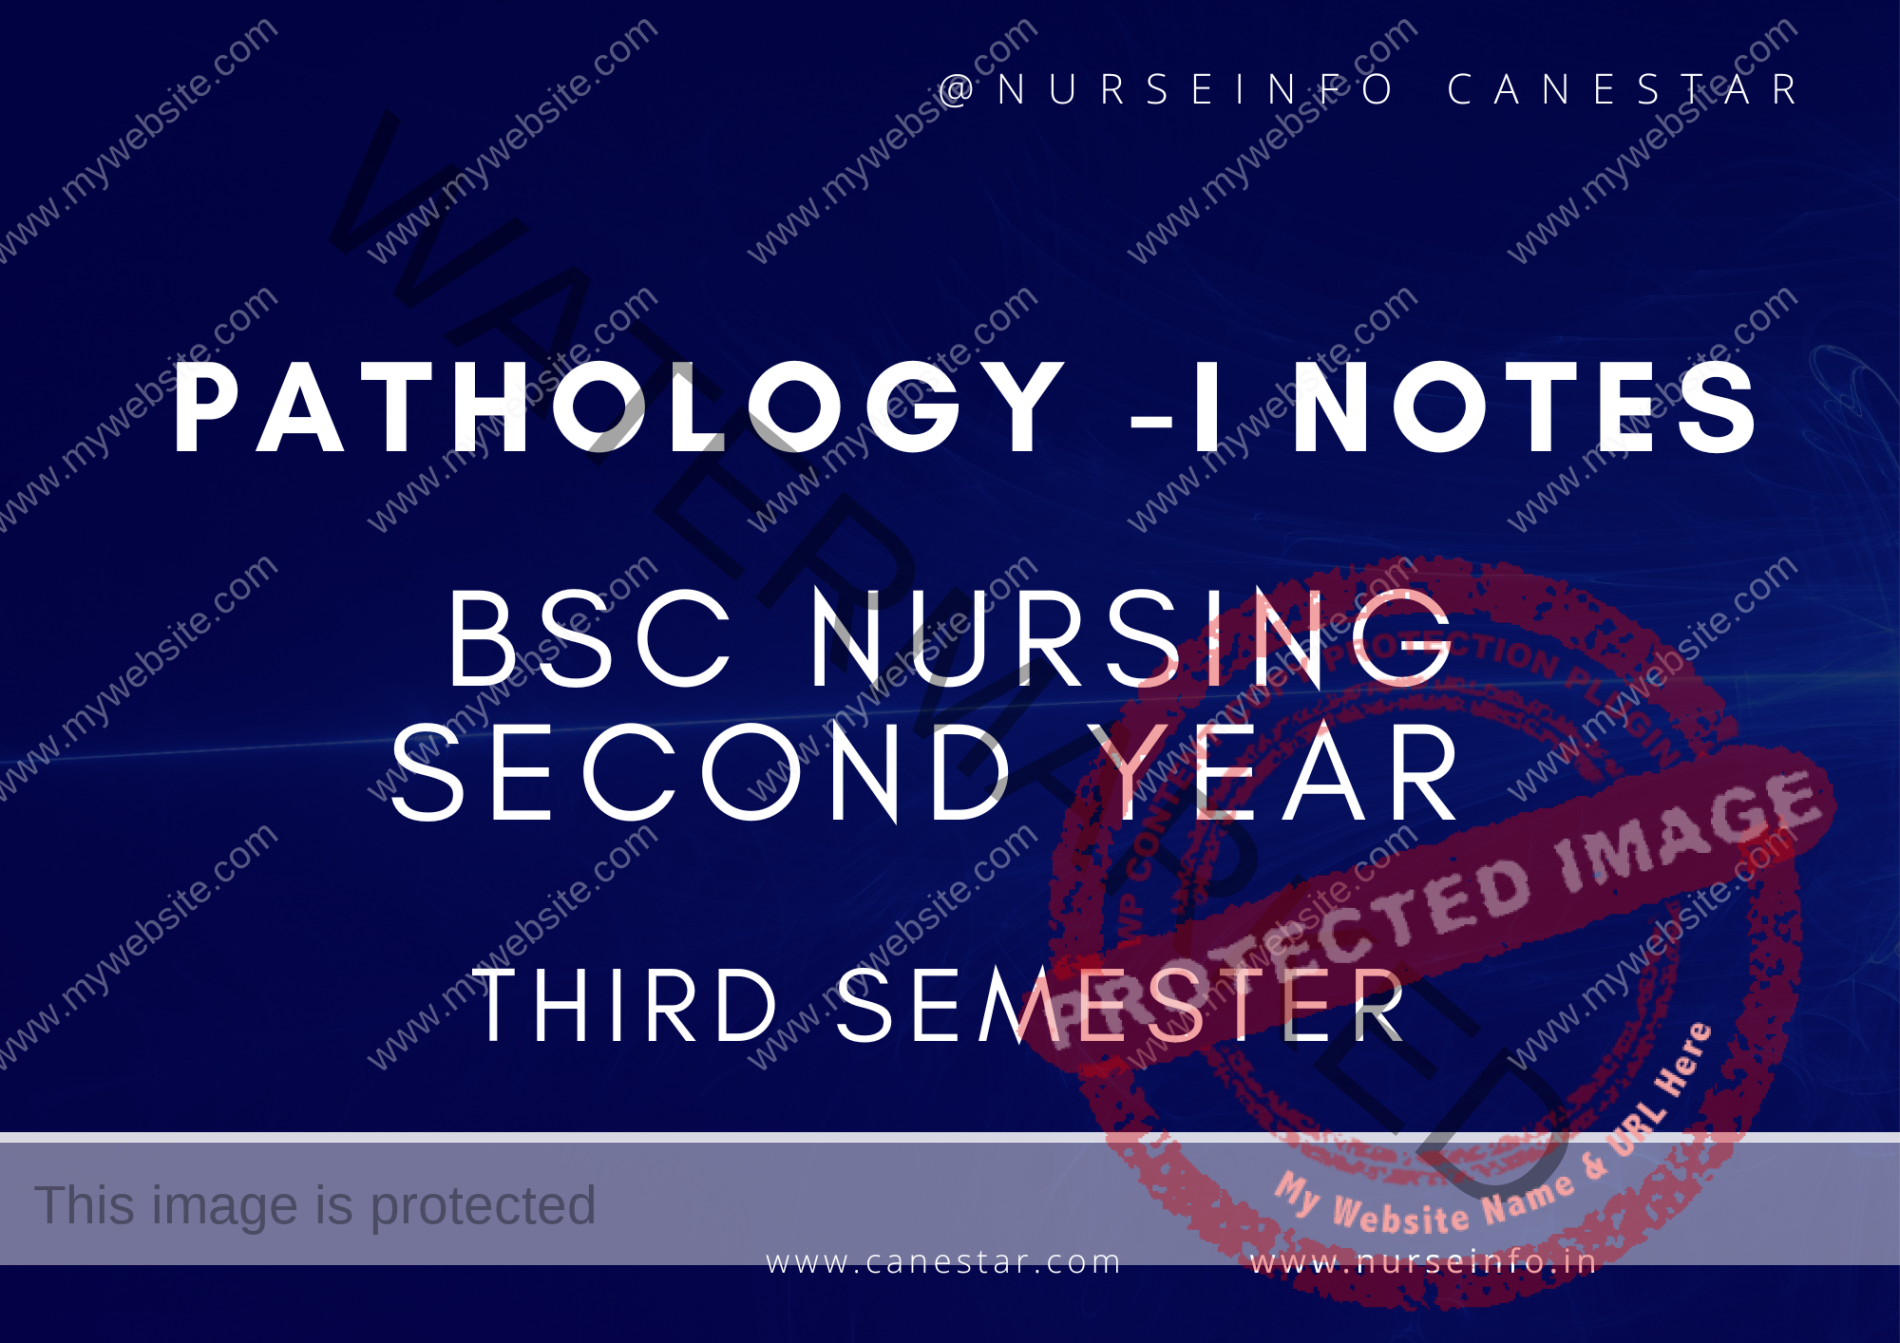 FREE PATHOLOGY I NOTES FOR BSC NURSING SECOND YEAR THIRD SEMESTER STUDENTS